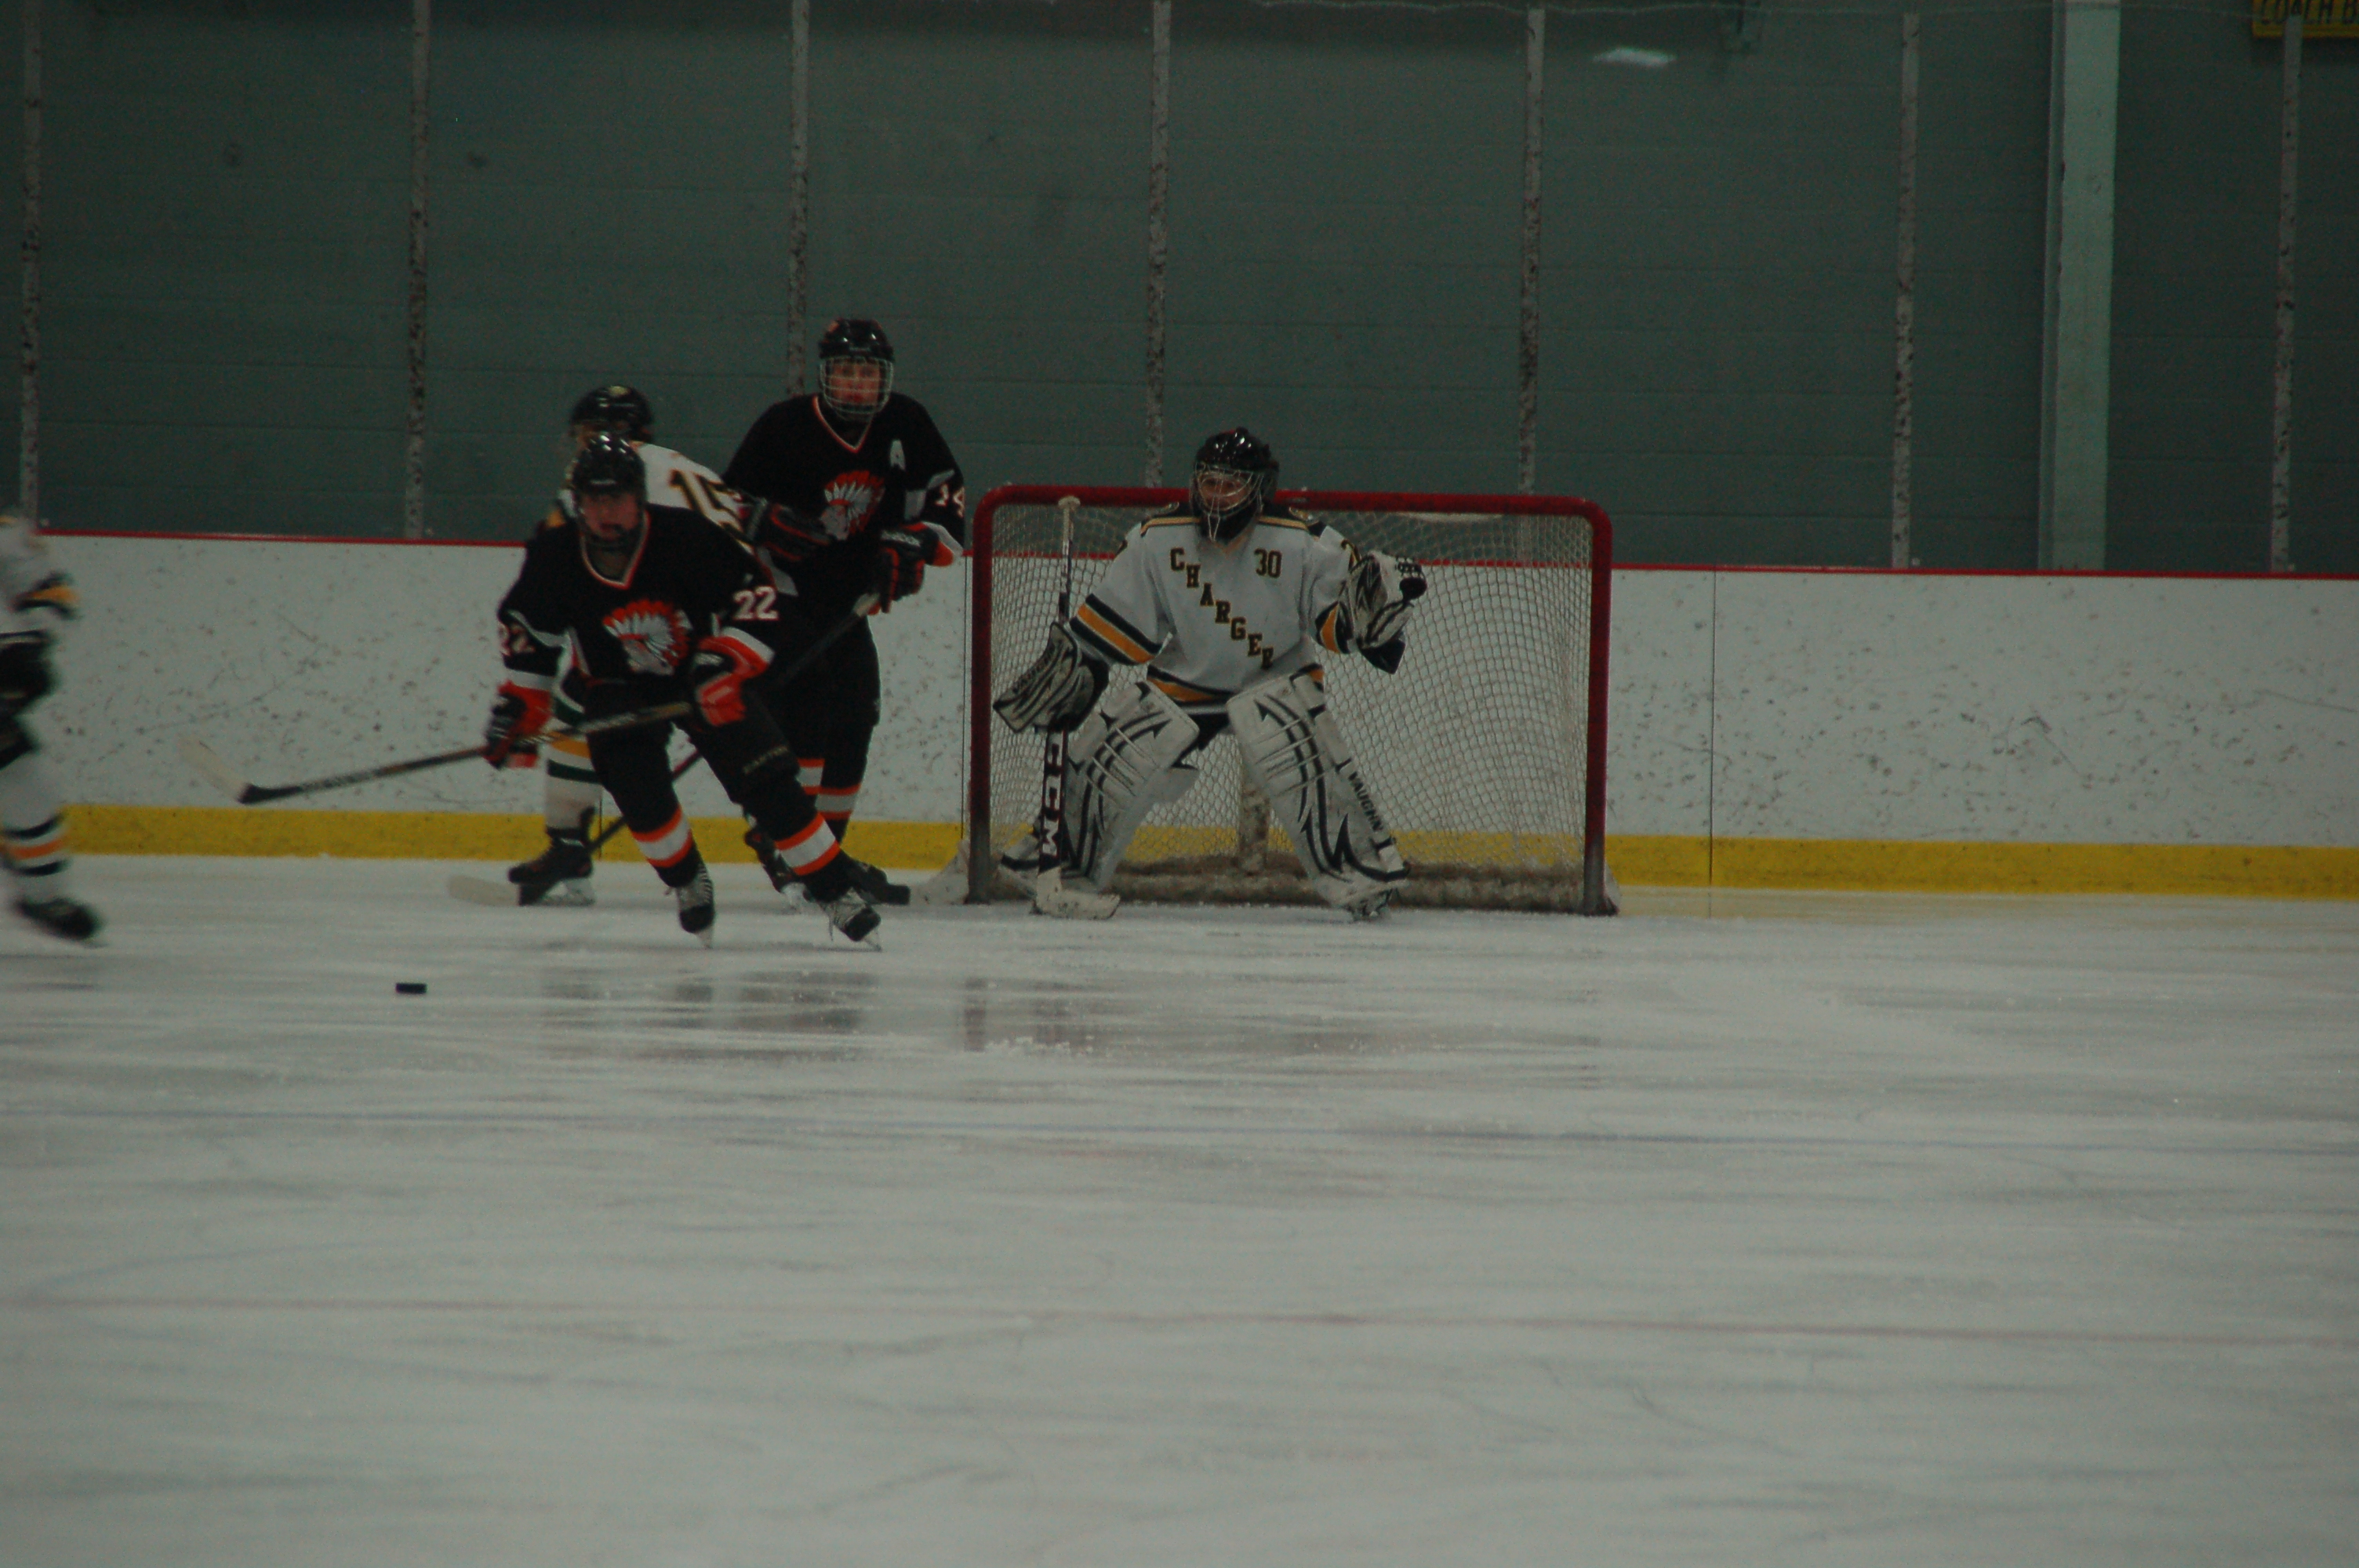 DHS hockey's previous game was against Cheboygan High School. Picture by Brinli Leonhardt.